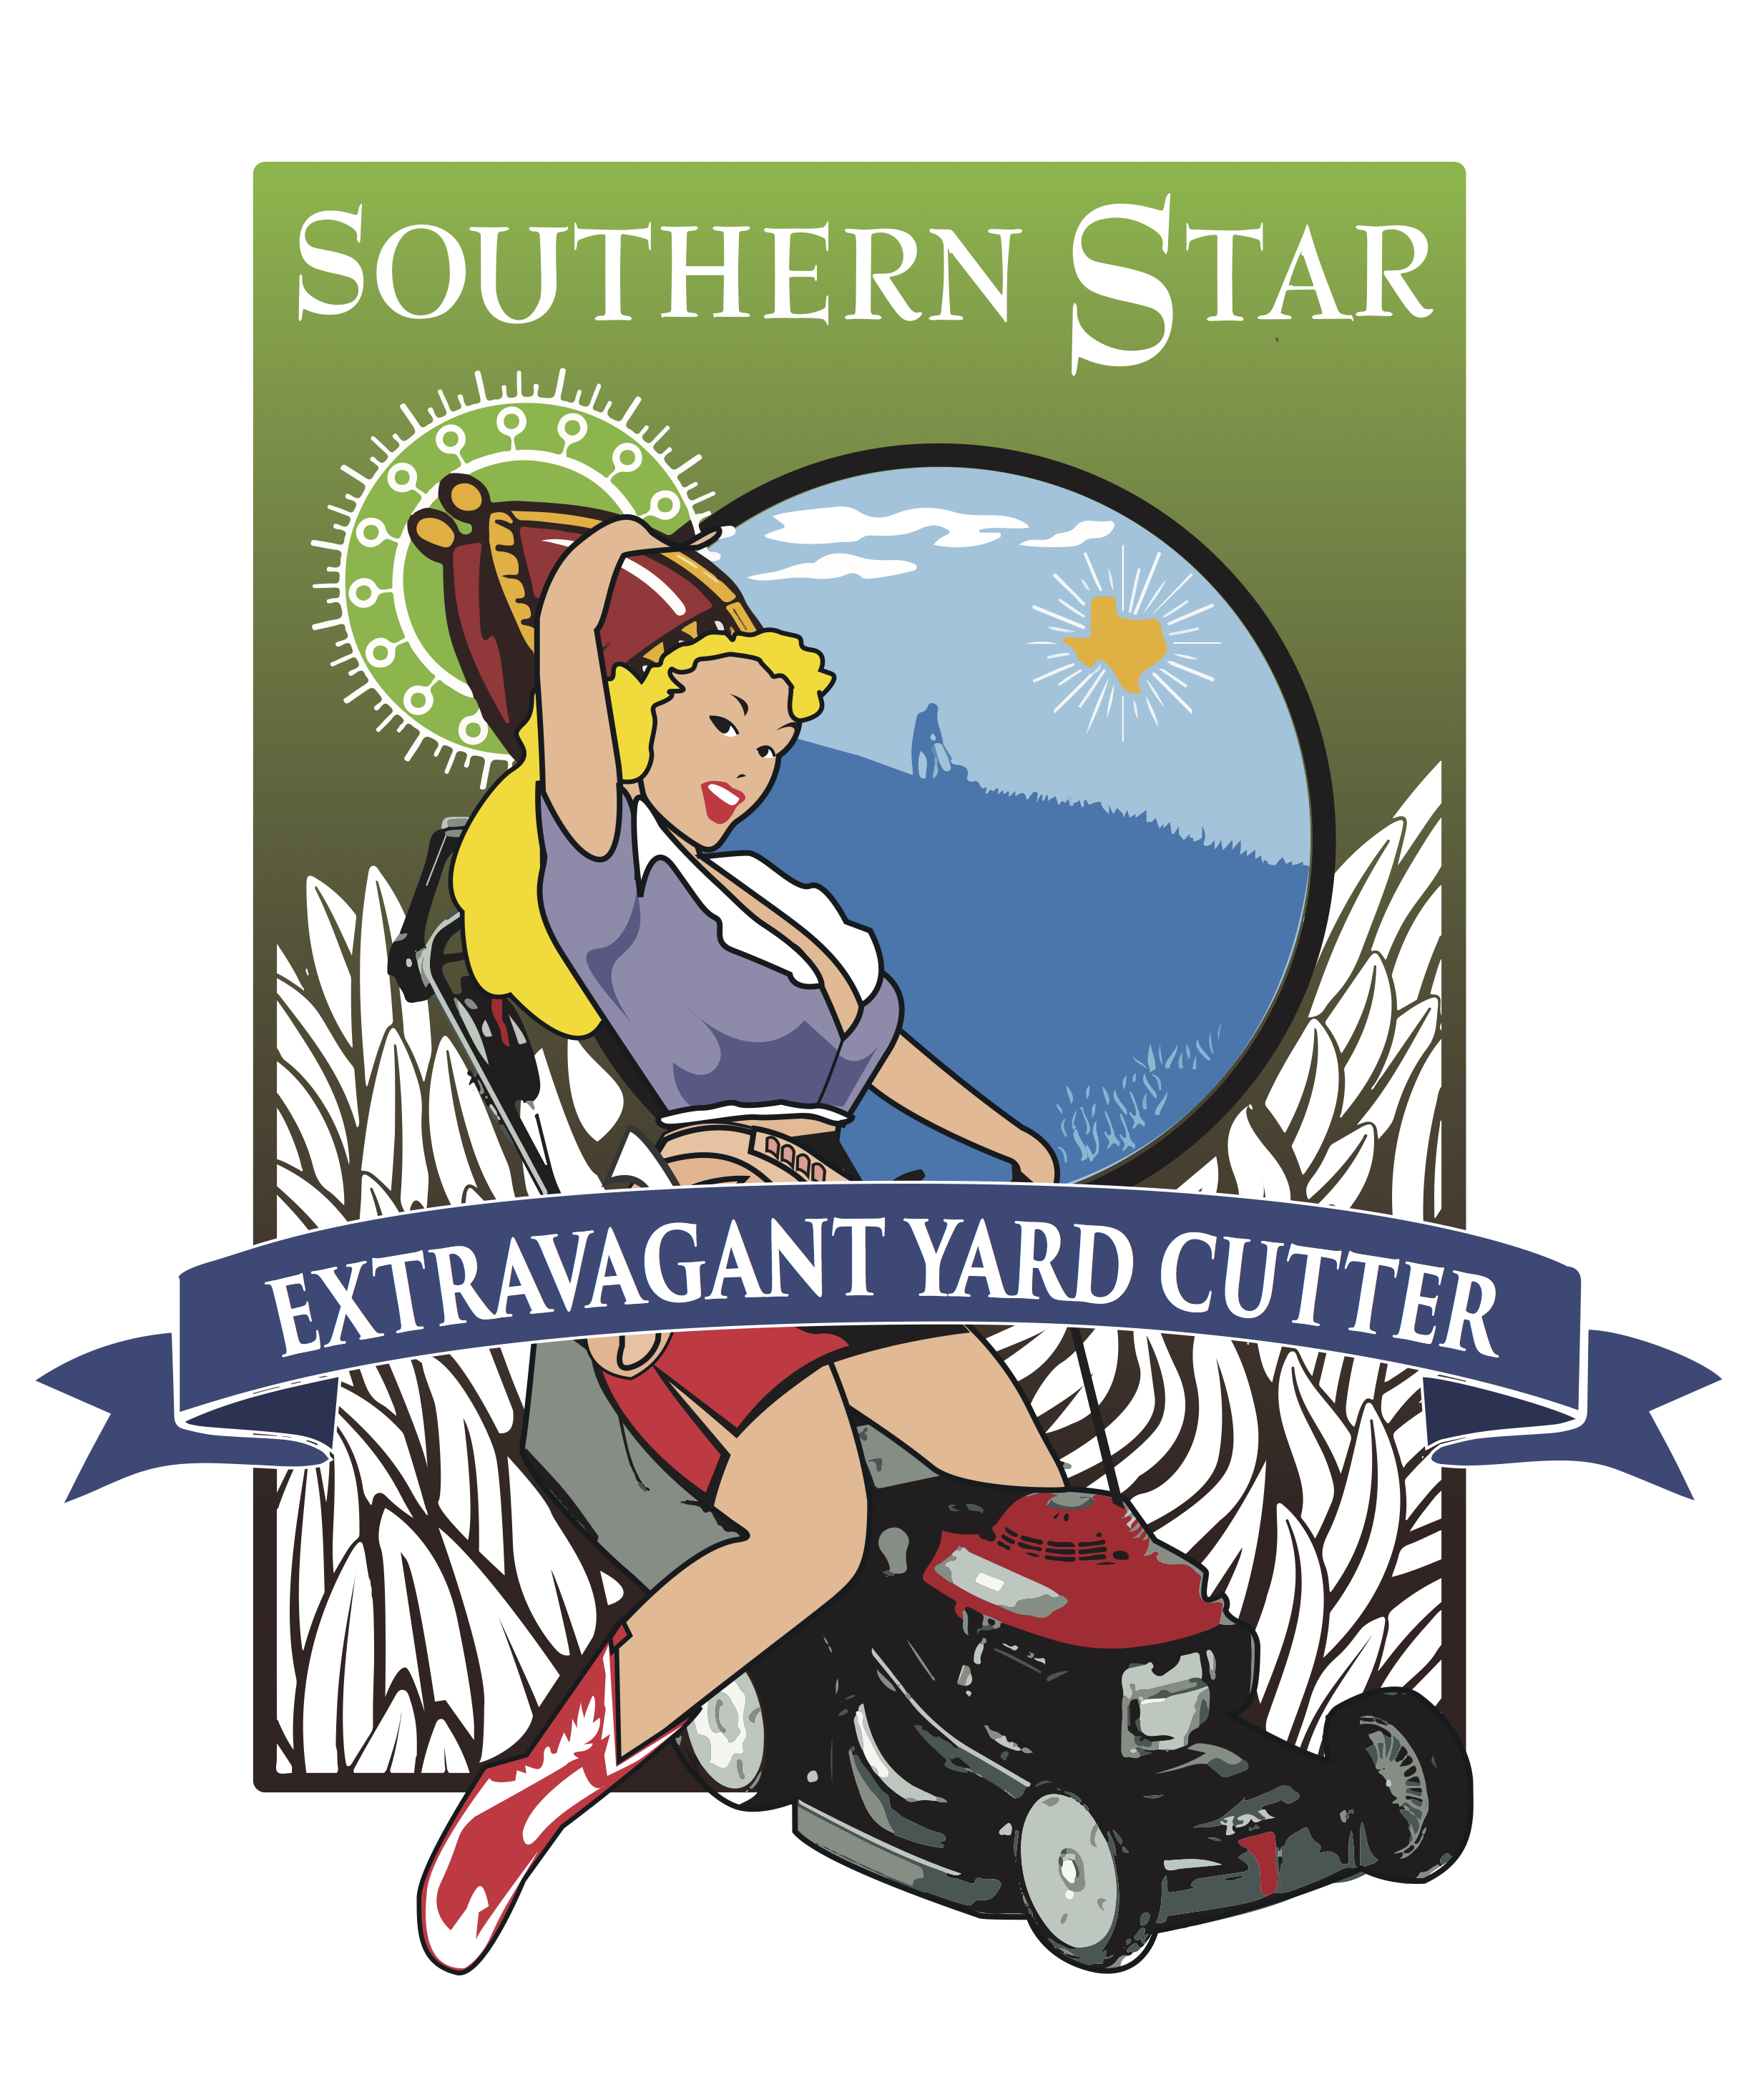 Southern Star Saint Arnold Tribute Beer - Extravagant Yard Cutter